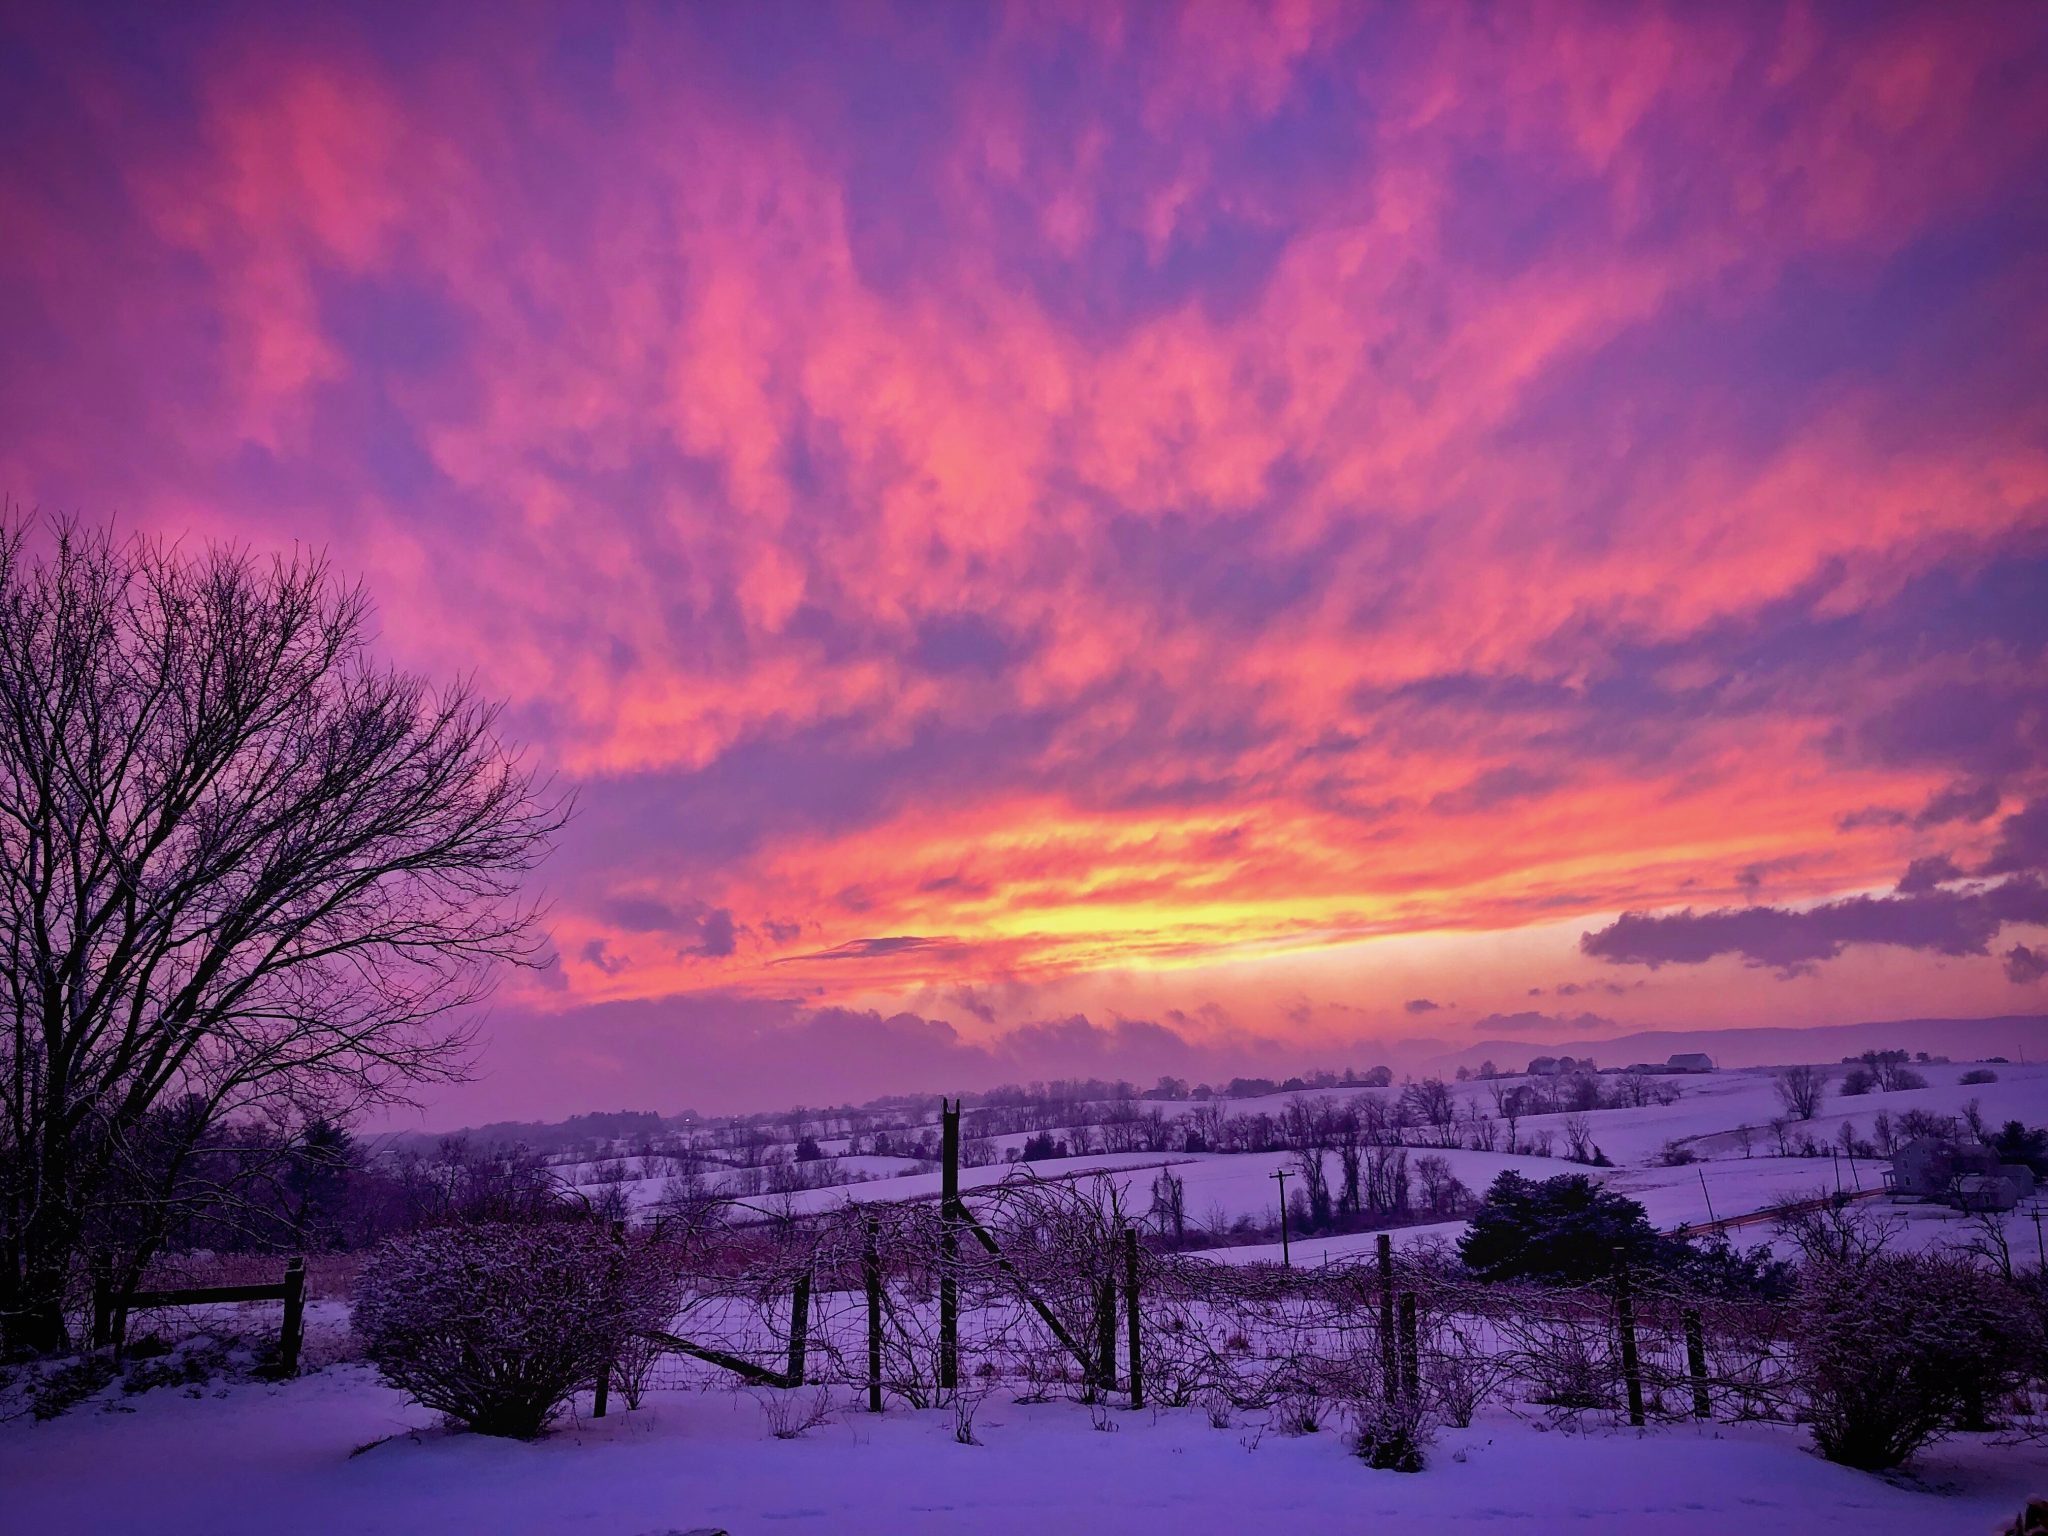 Sunset at winter over snowy farm fields